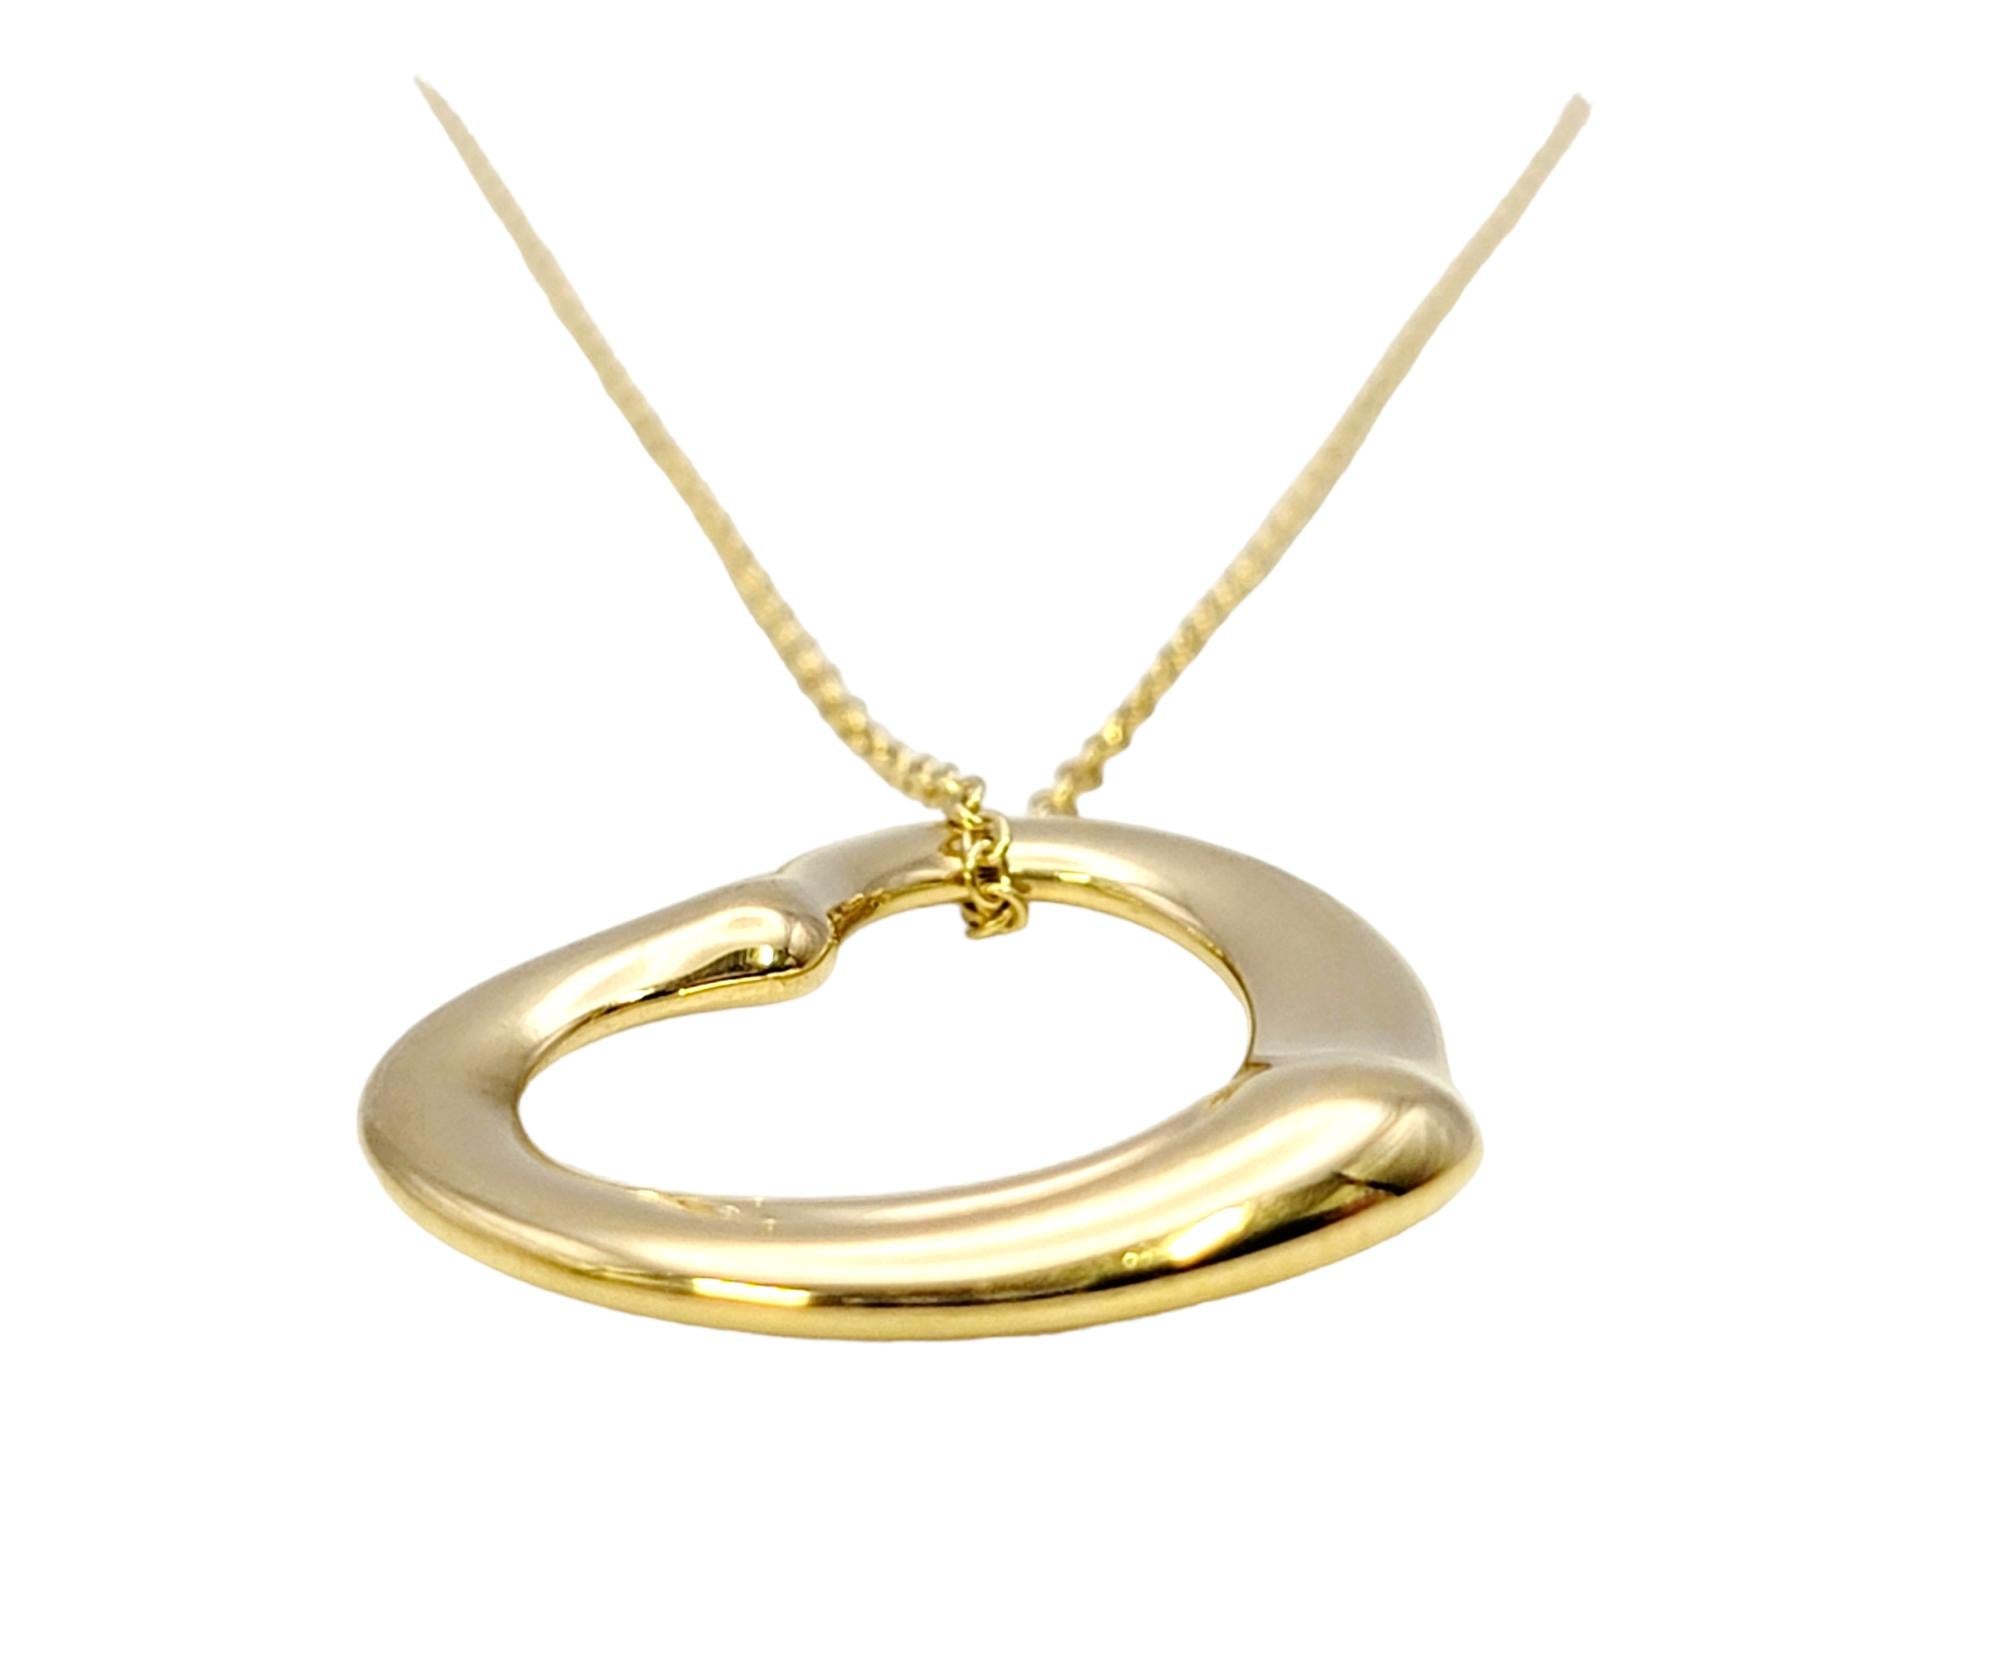 Elsa Peretti for Tiffany & Co. 18 Karat Yellow Gold Open Heart Pendant Necklace In Good Condition For Sale In Scottsdale, AZ